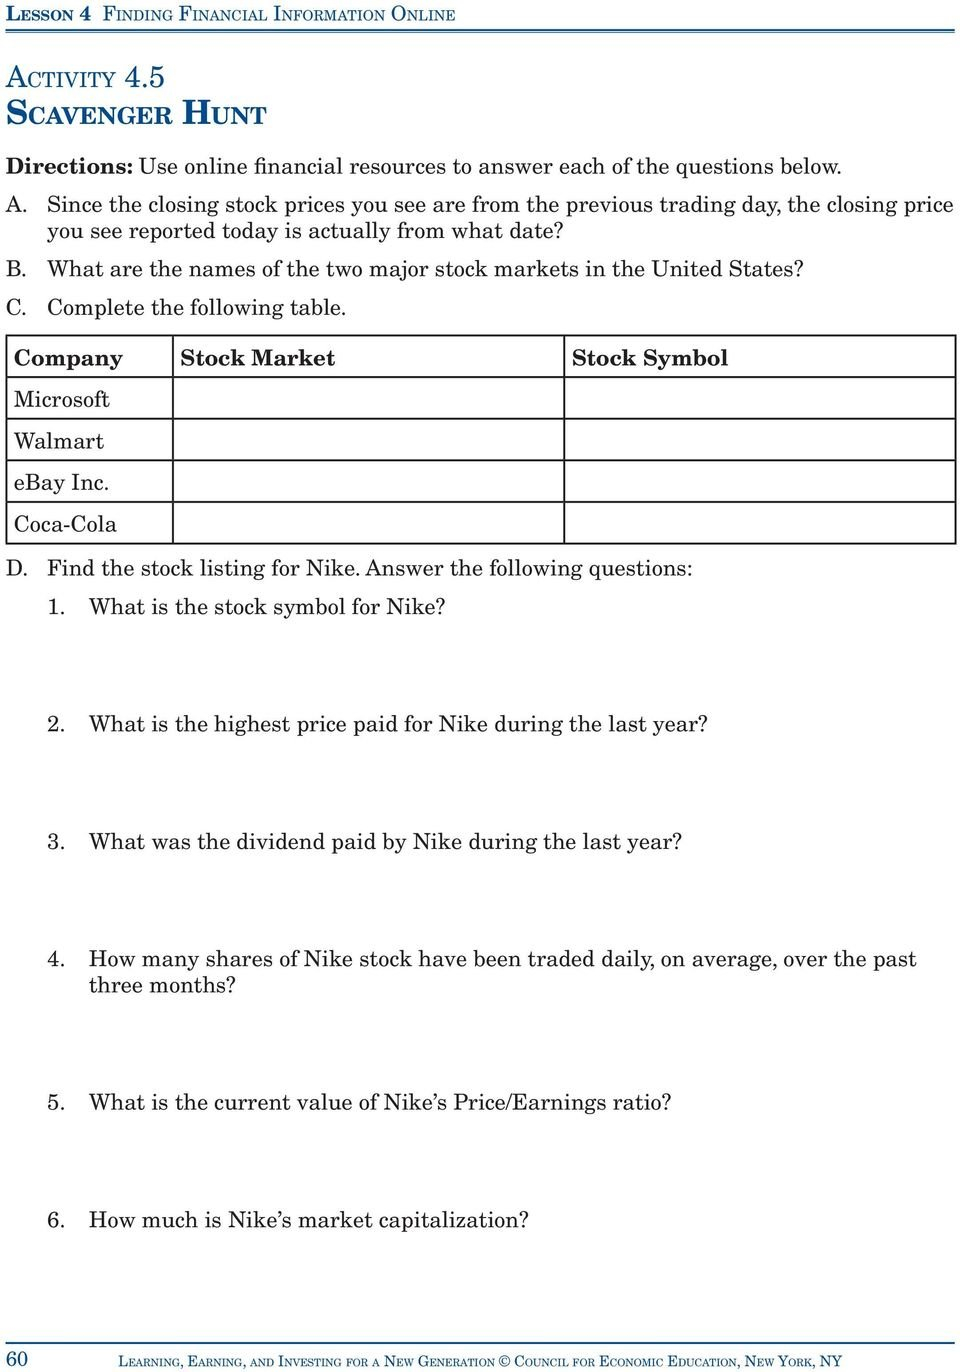 Activity 41 Reading A Stock Table  Pdf For Reading A Stock Table Worksheet Answers